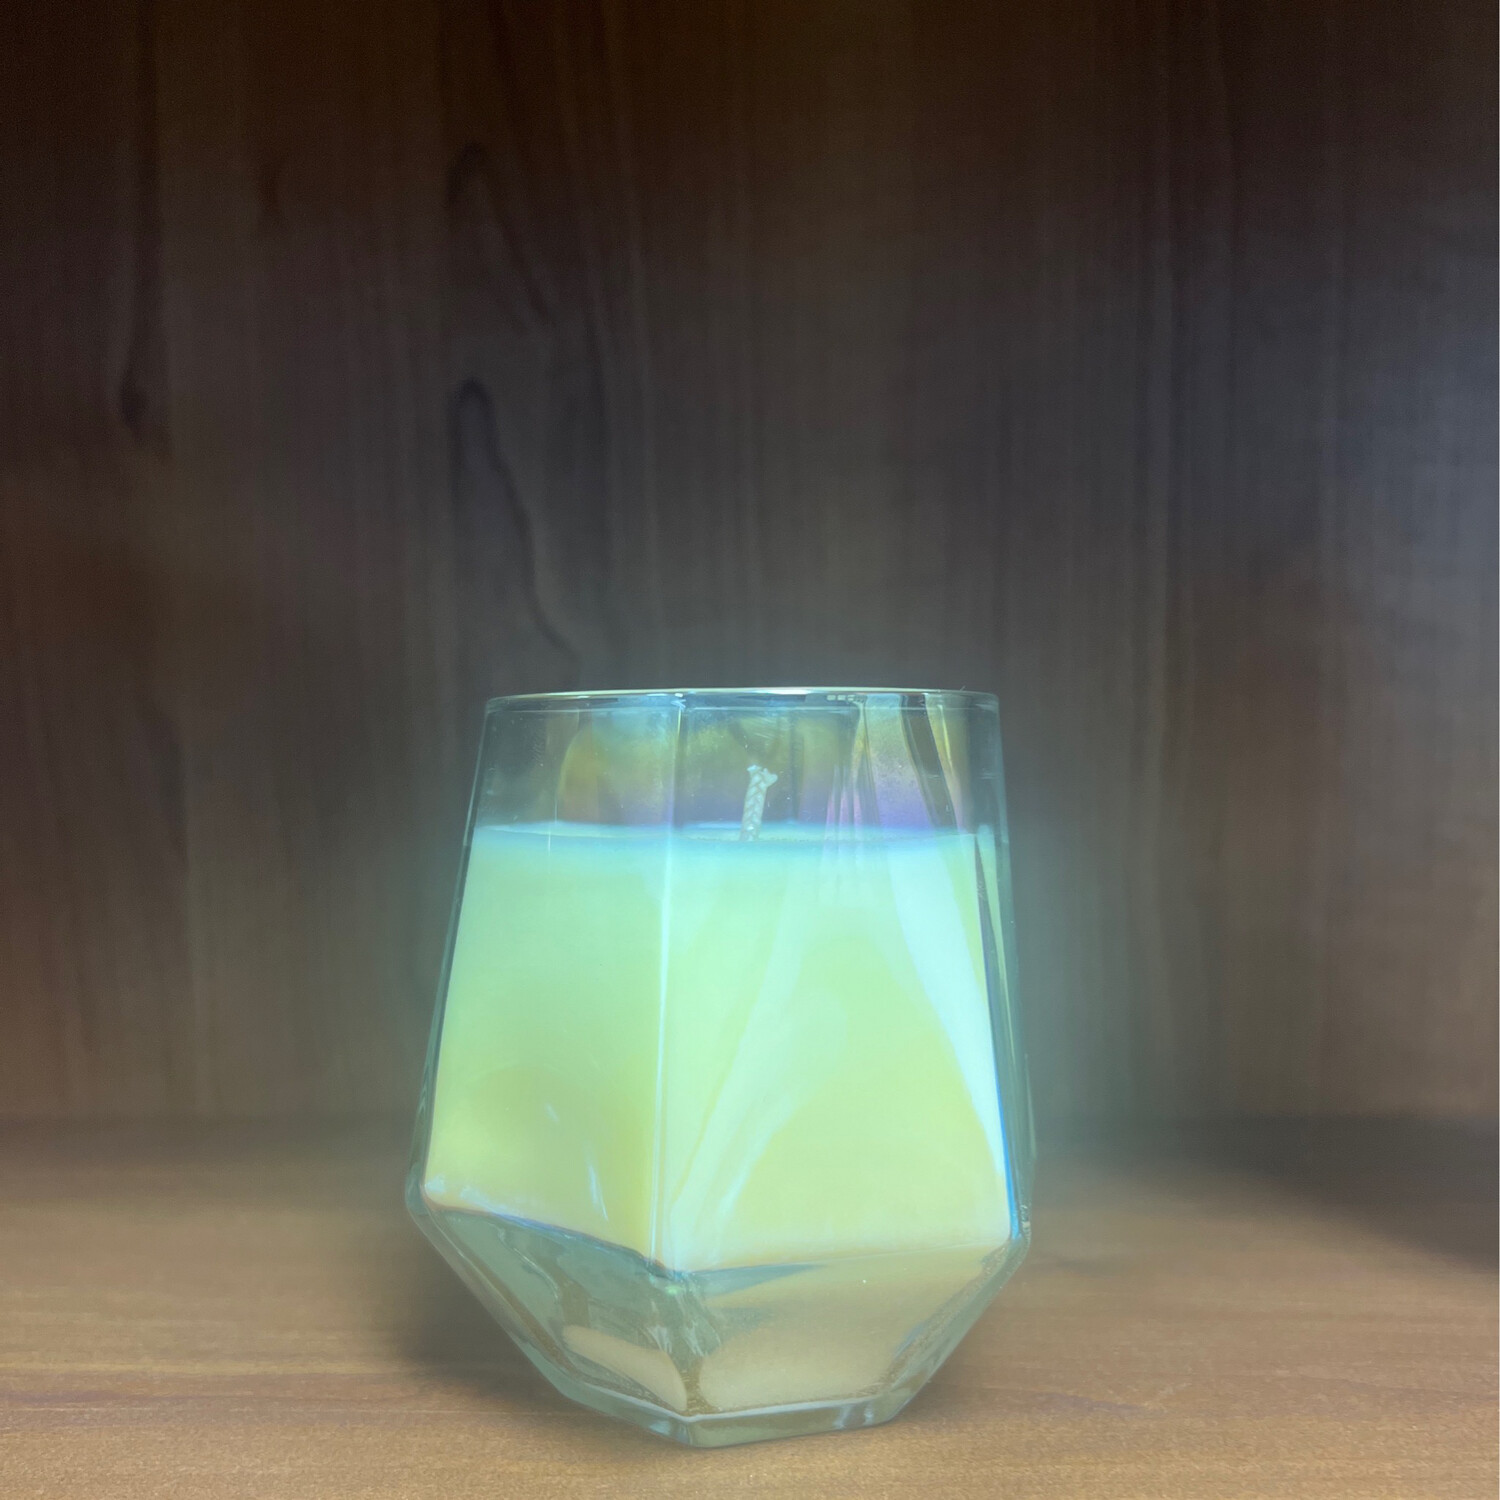 Iridescent Decor Candle (soy)